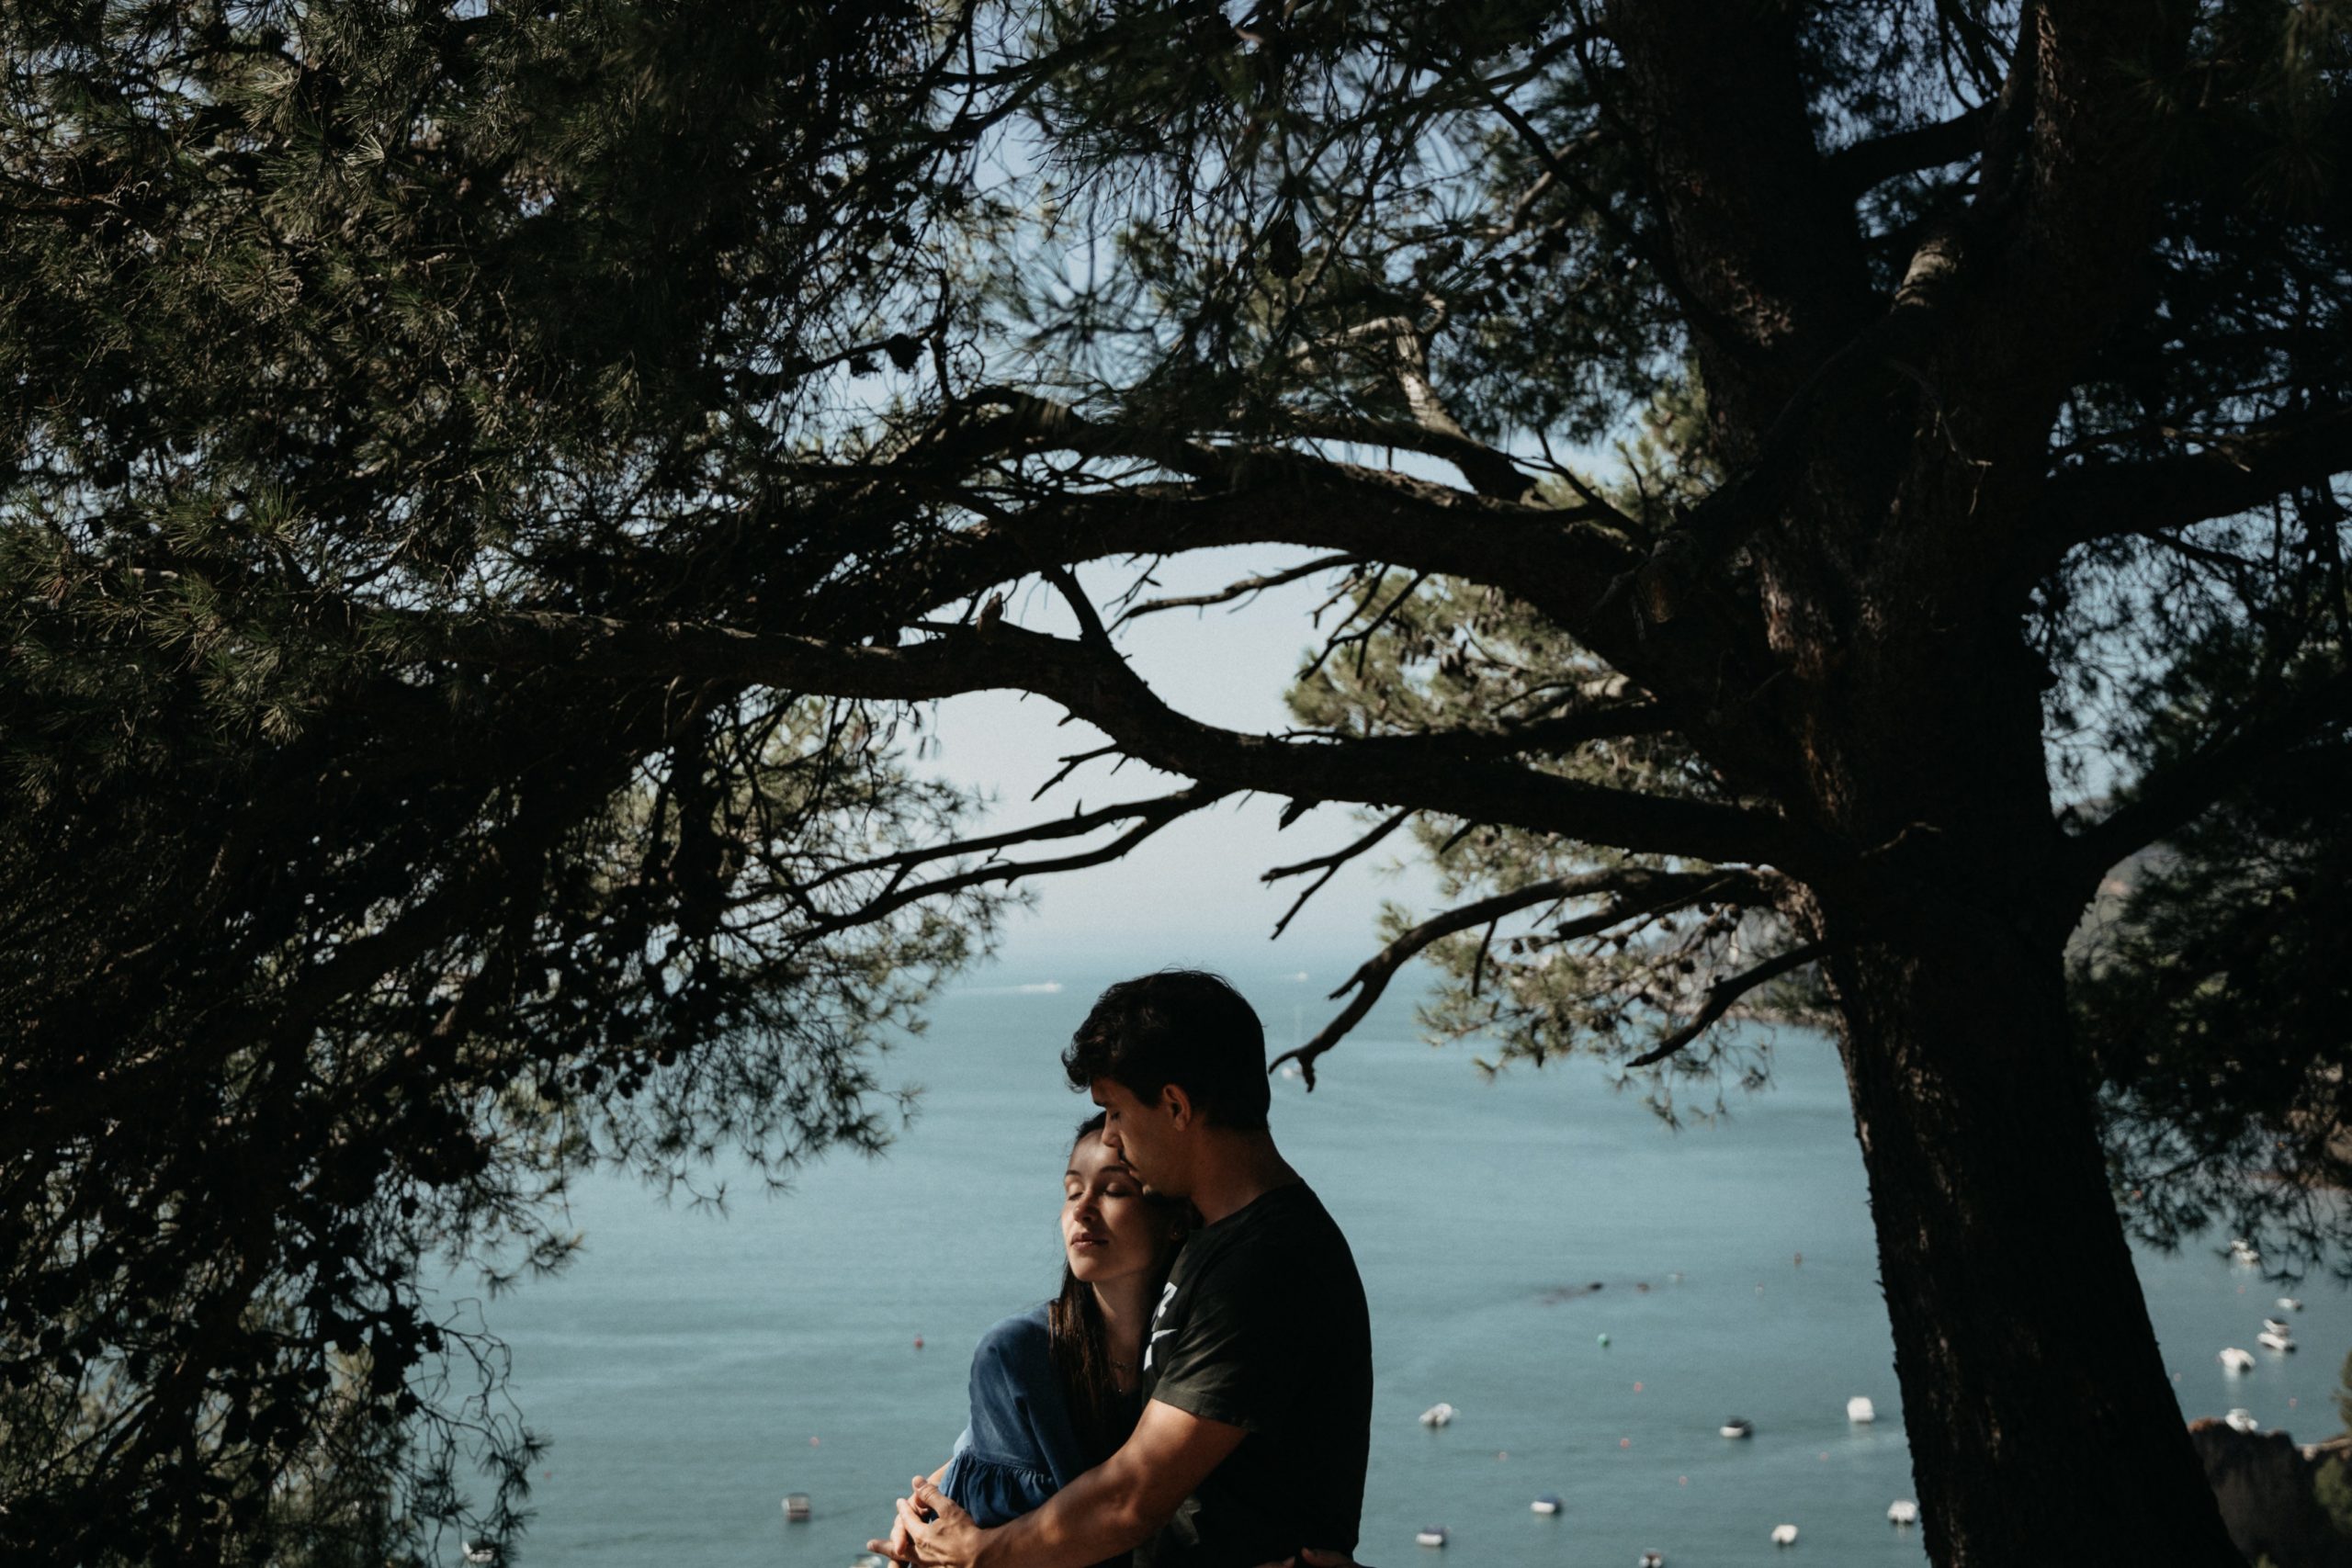 A couple embraces under a tree, in front of a lake.